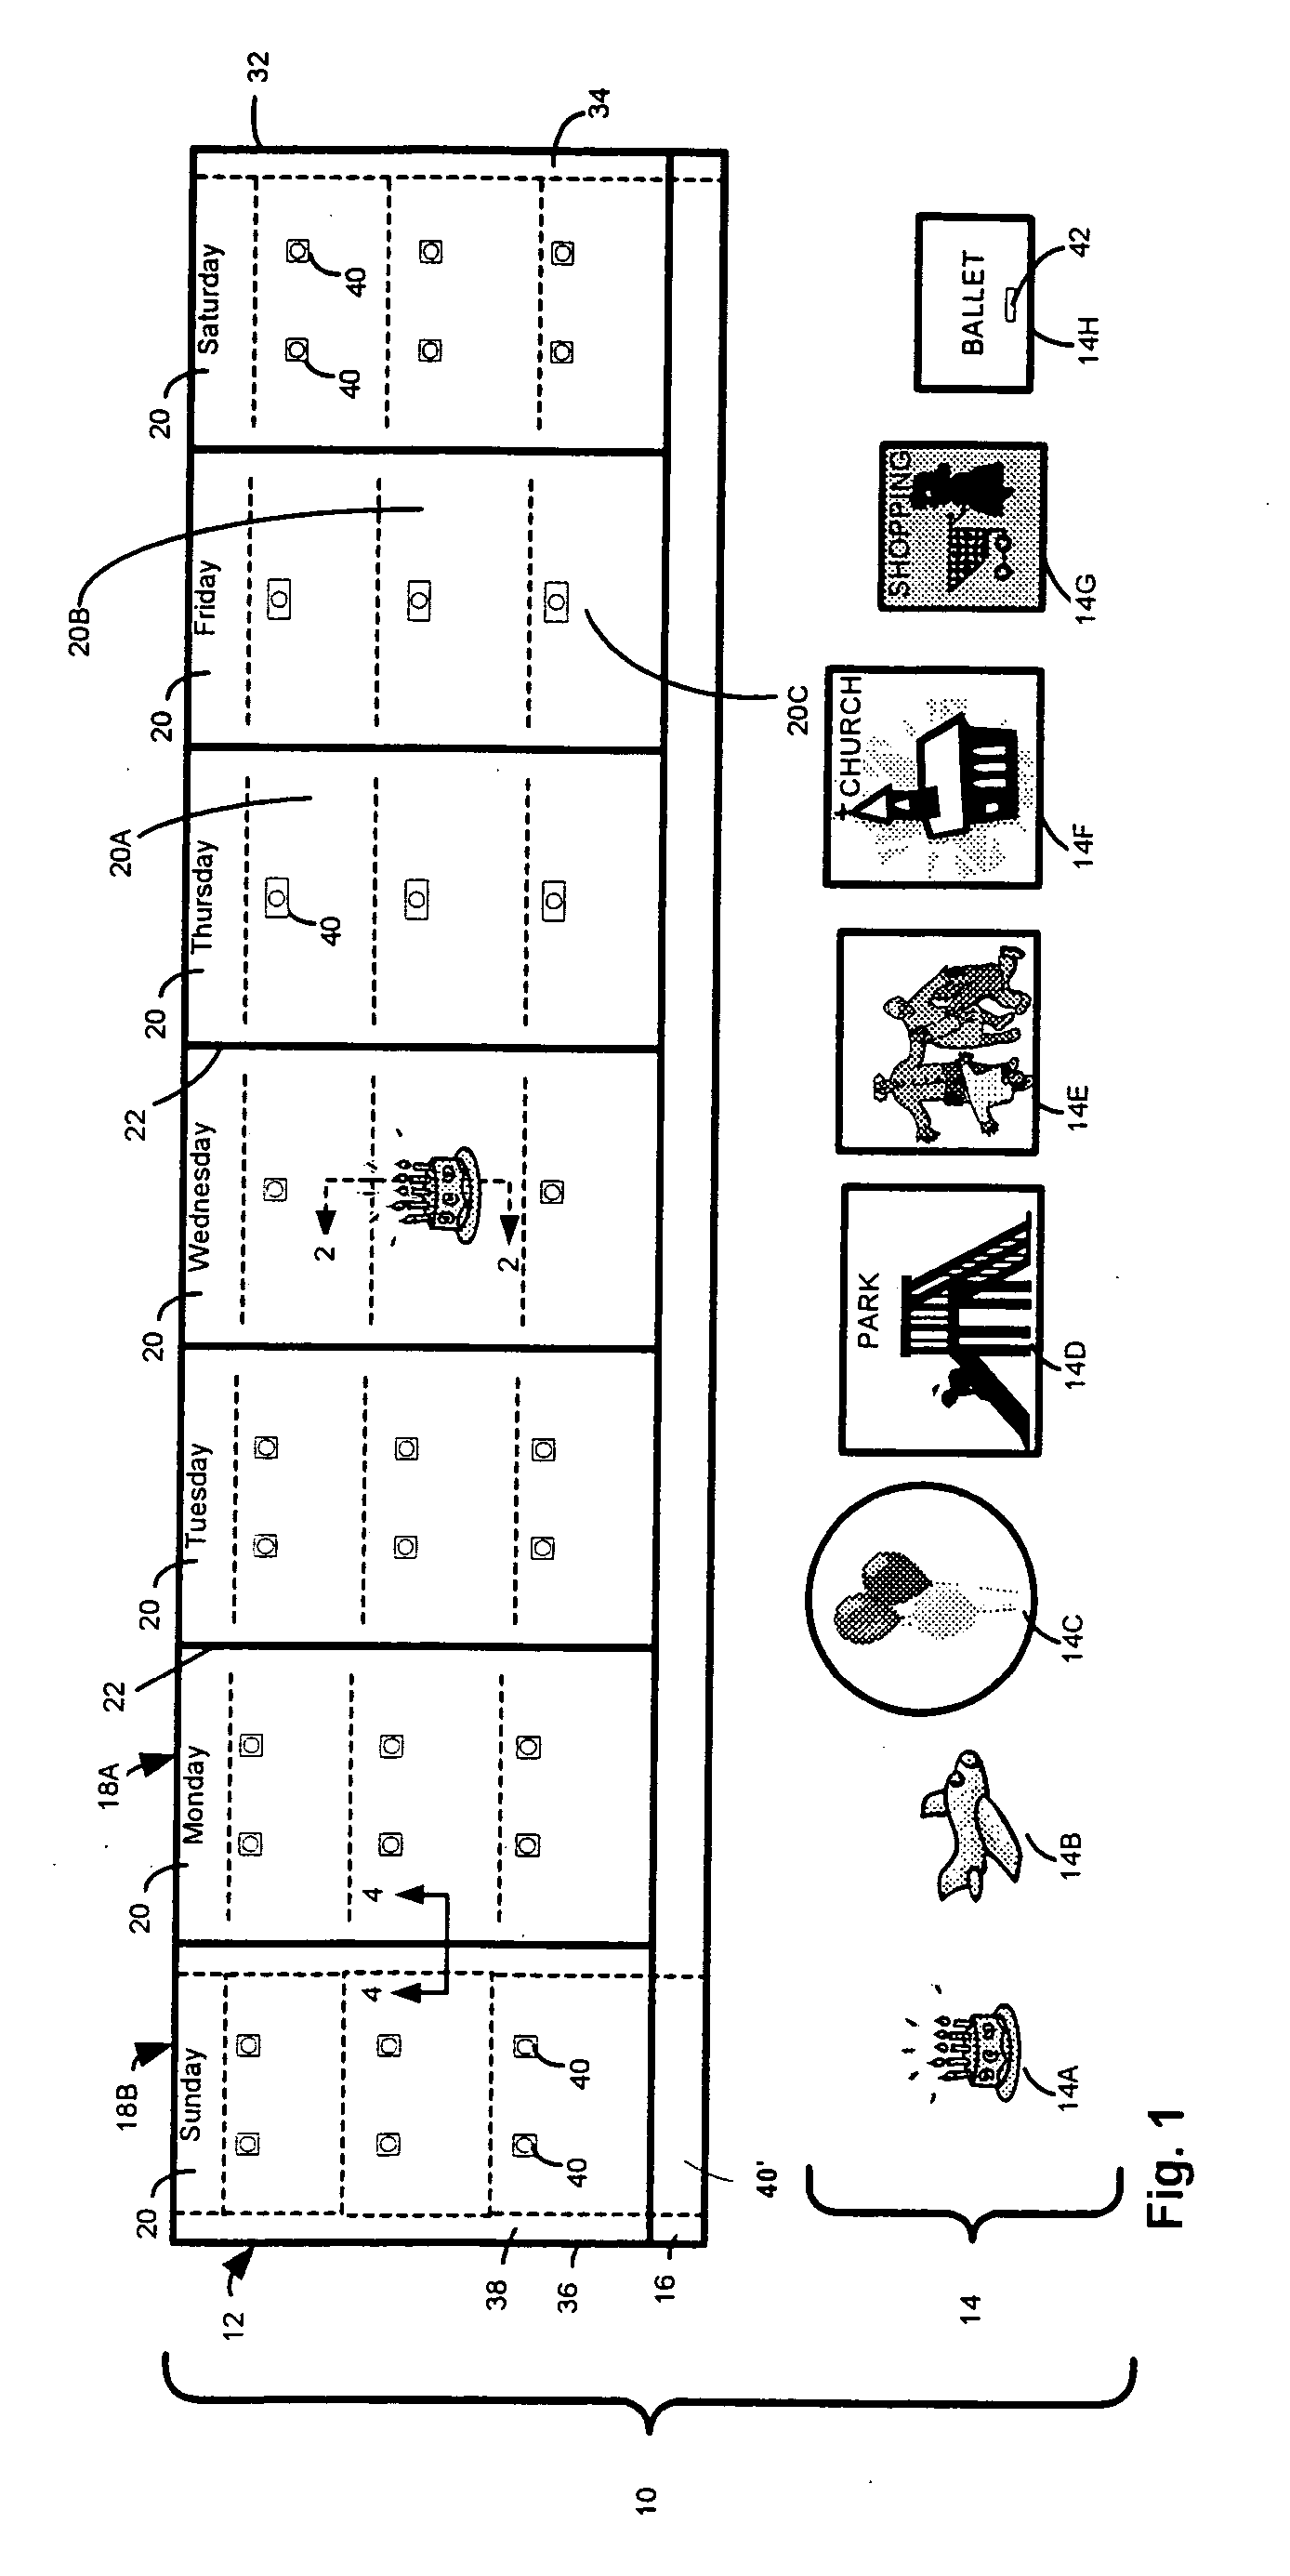 Activity scheduling device